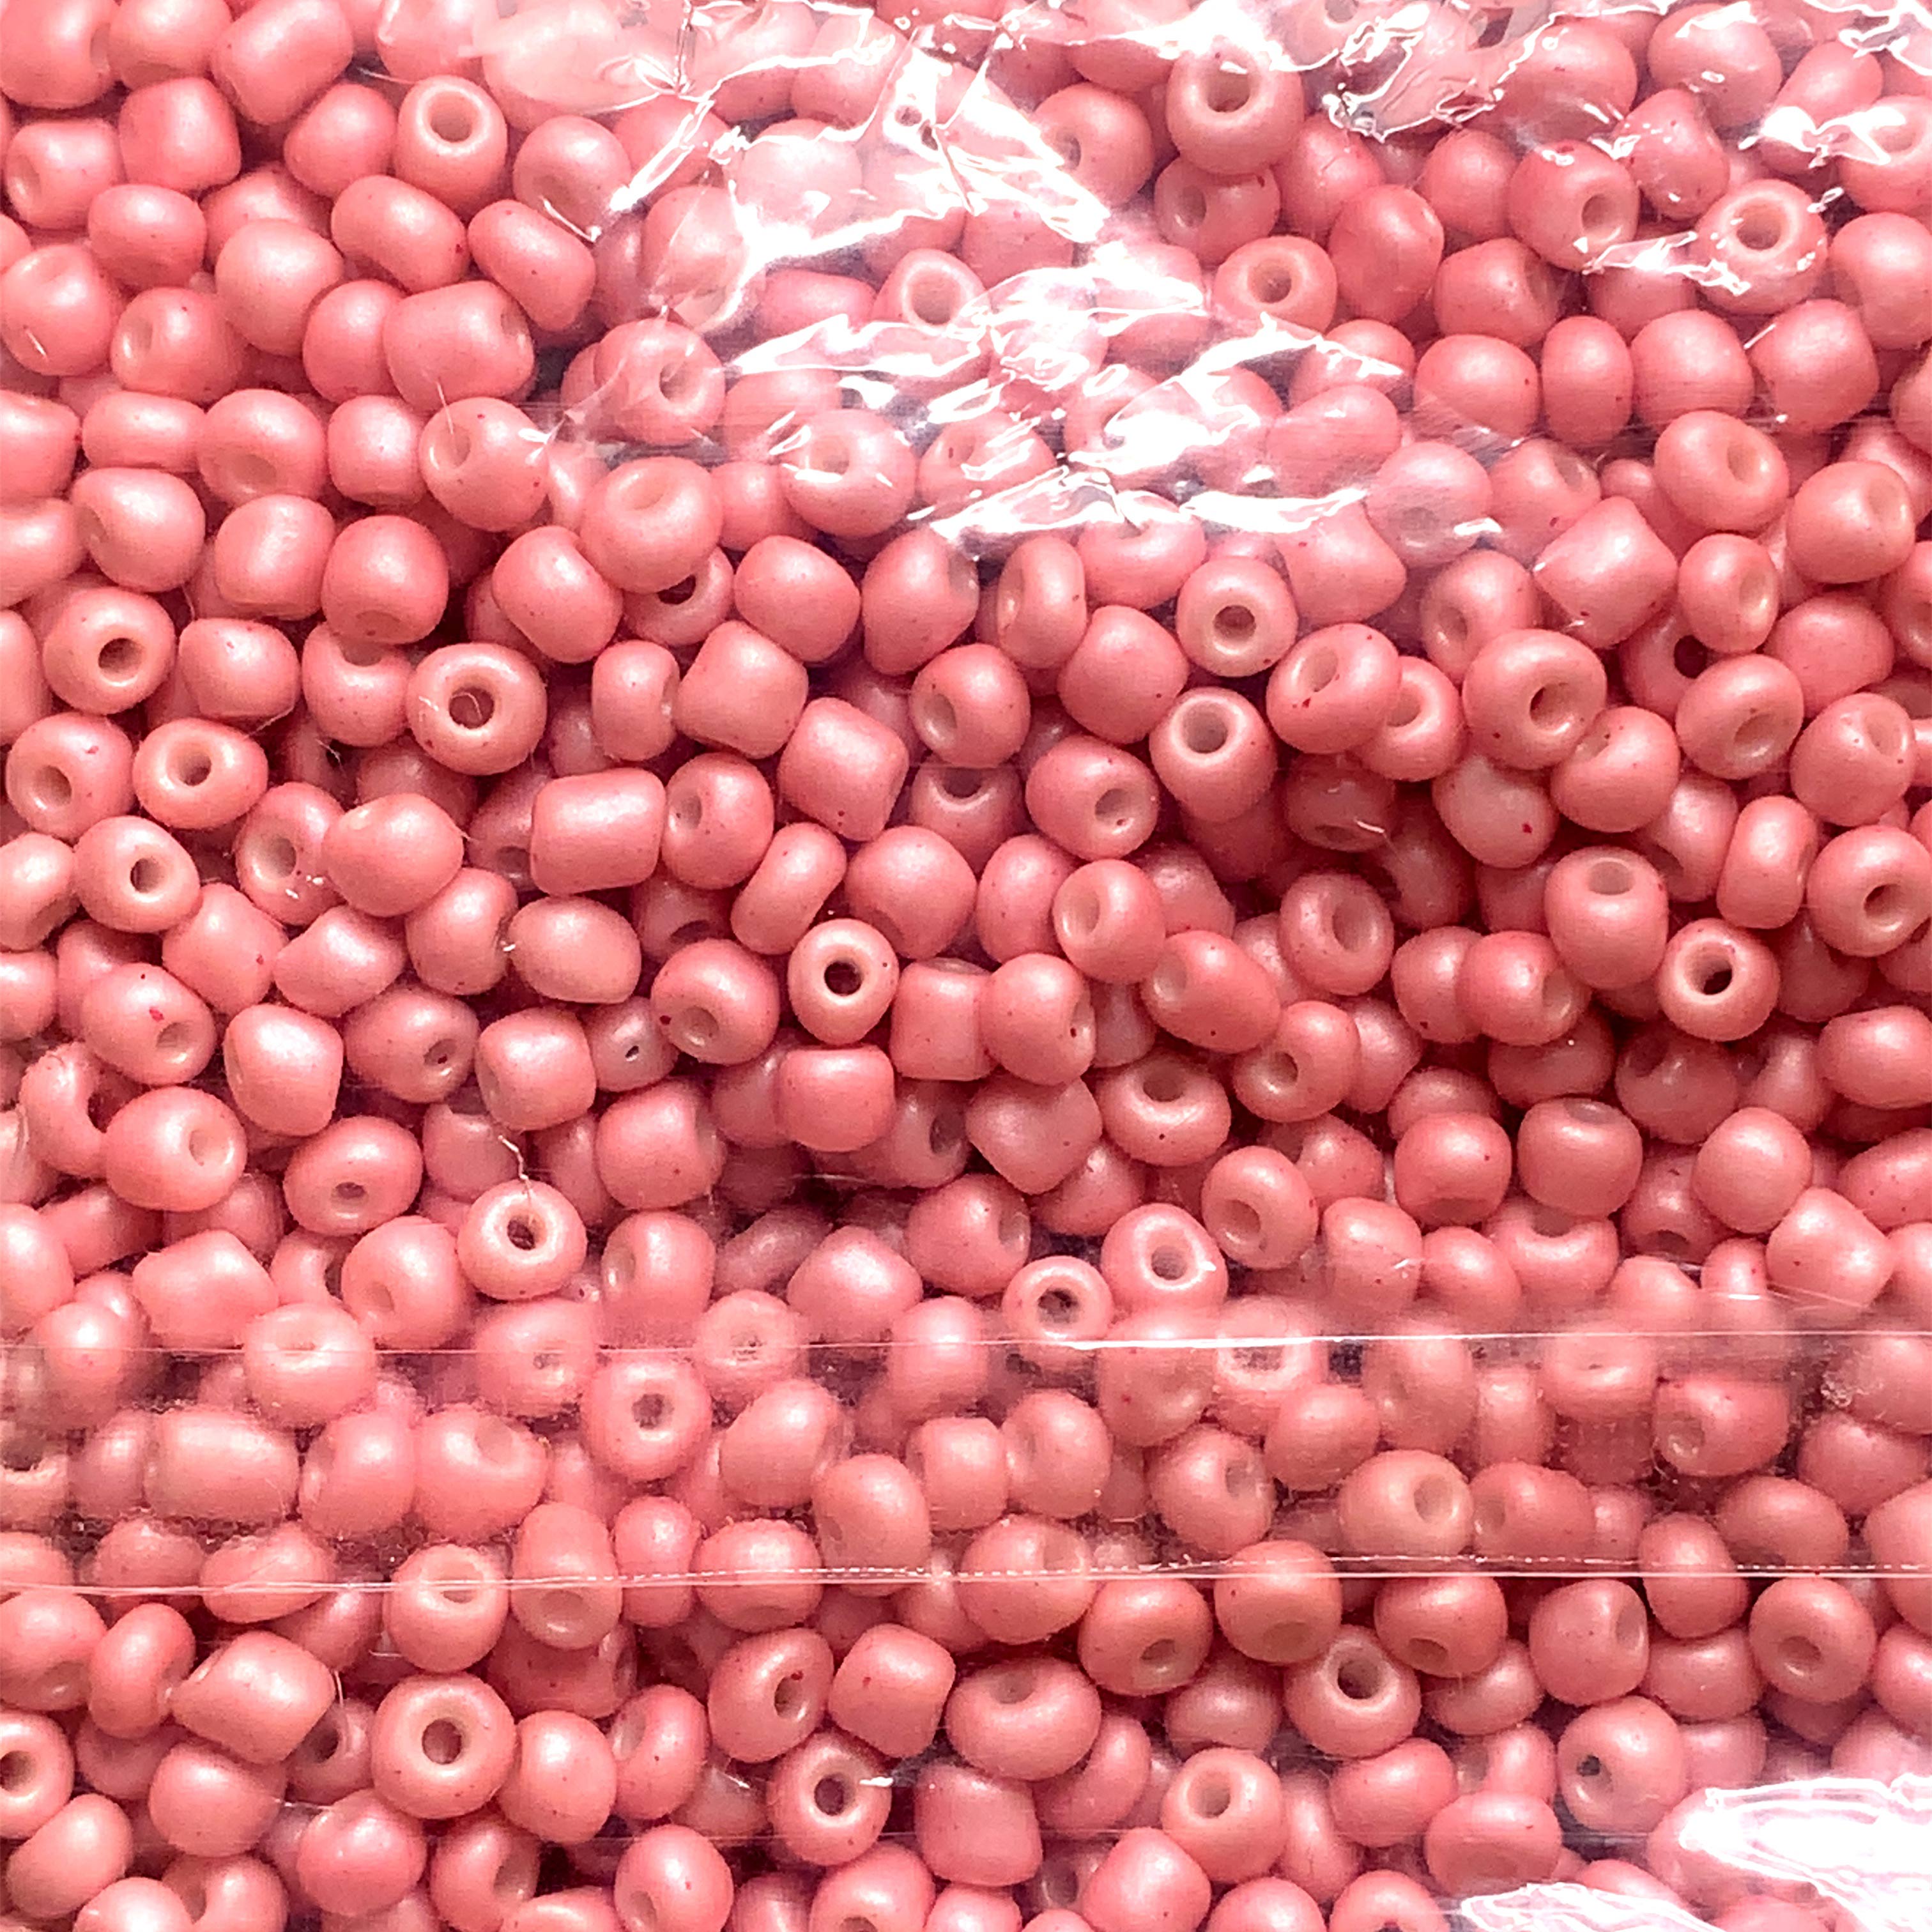 4mm Pastel Pink Opaque Glass Seed Beads - 400g Per Bag